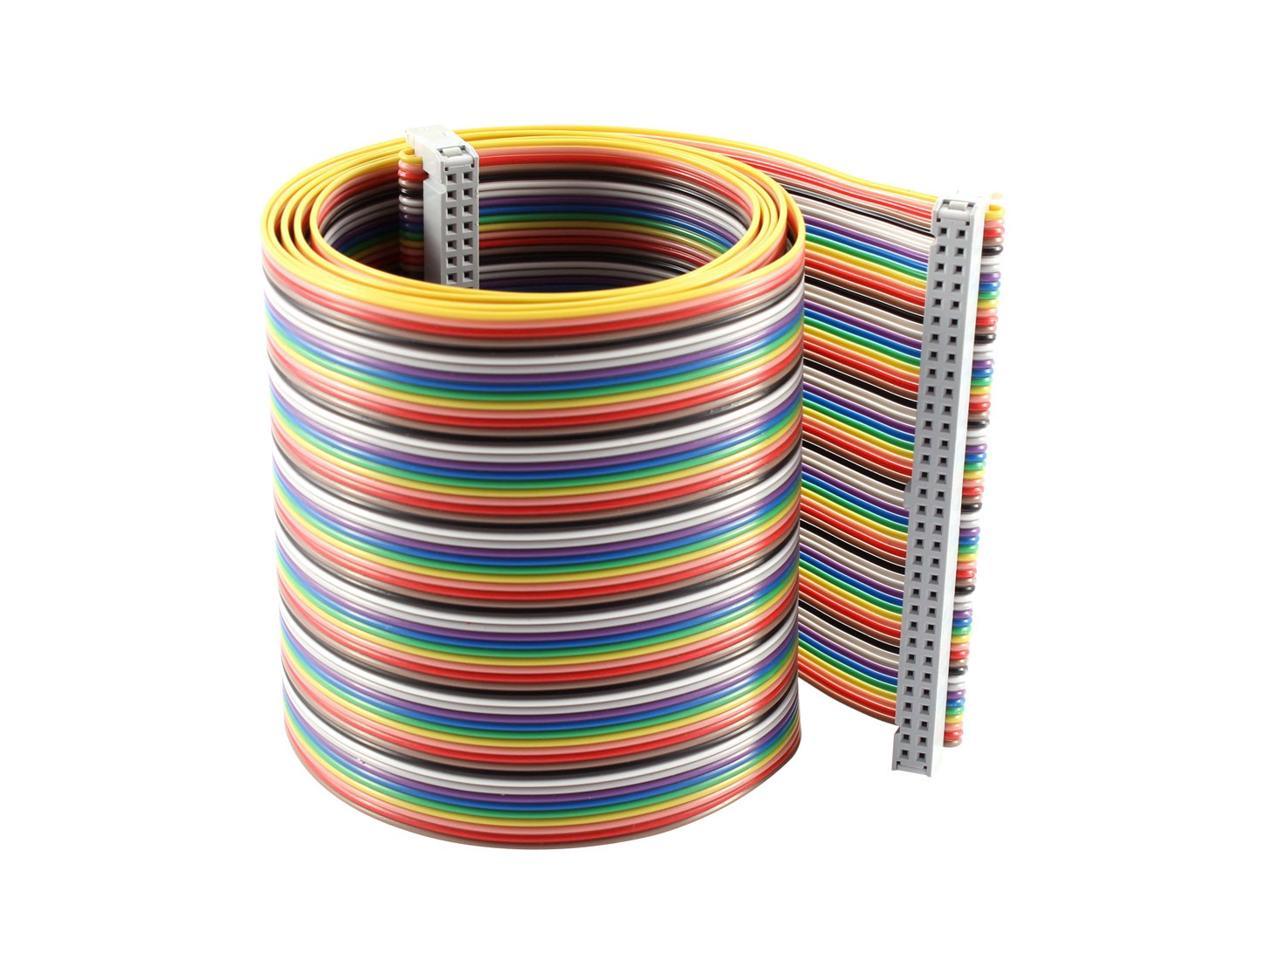 2.54mm Pitch 26 Pin 26 Way F/F Rainbow IDC Flat Ribbon Cable Connector 118cm